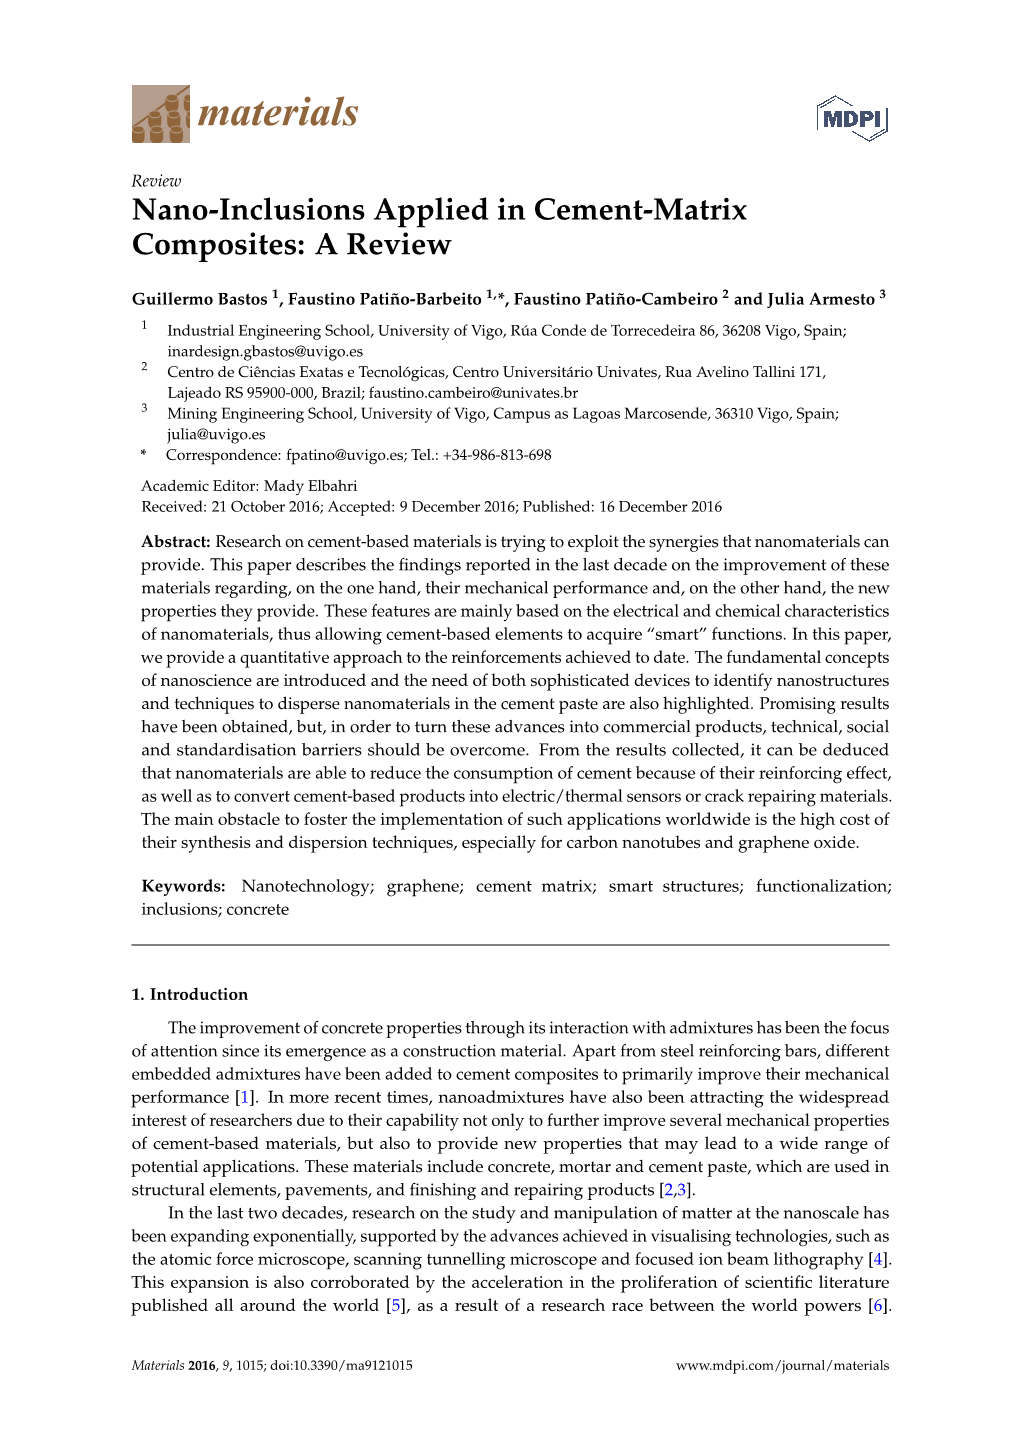 Nano-Inclusions Applied in Cement-Matrix Composites: a Review